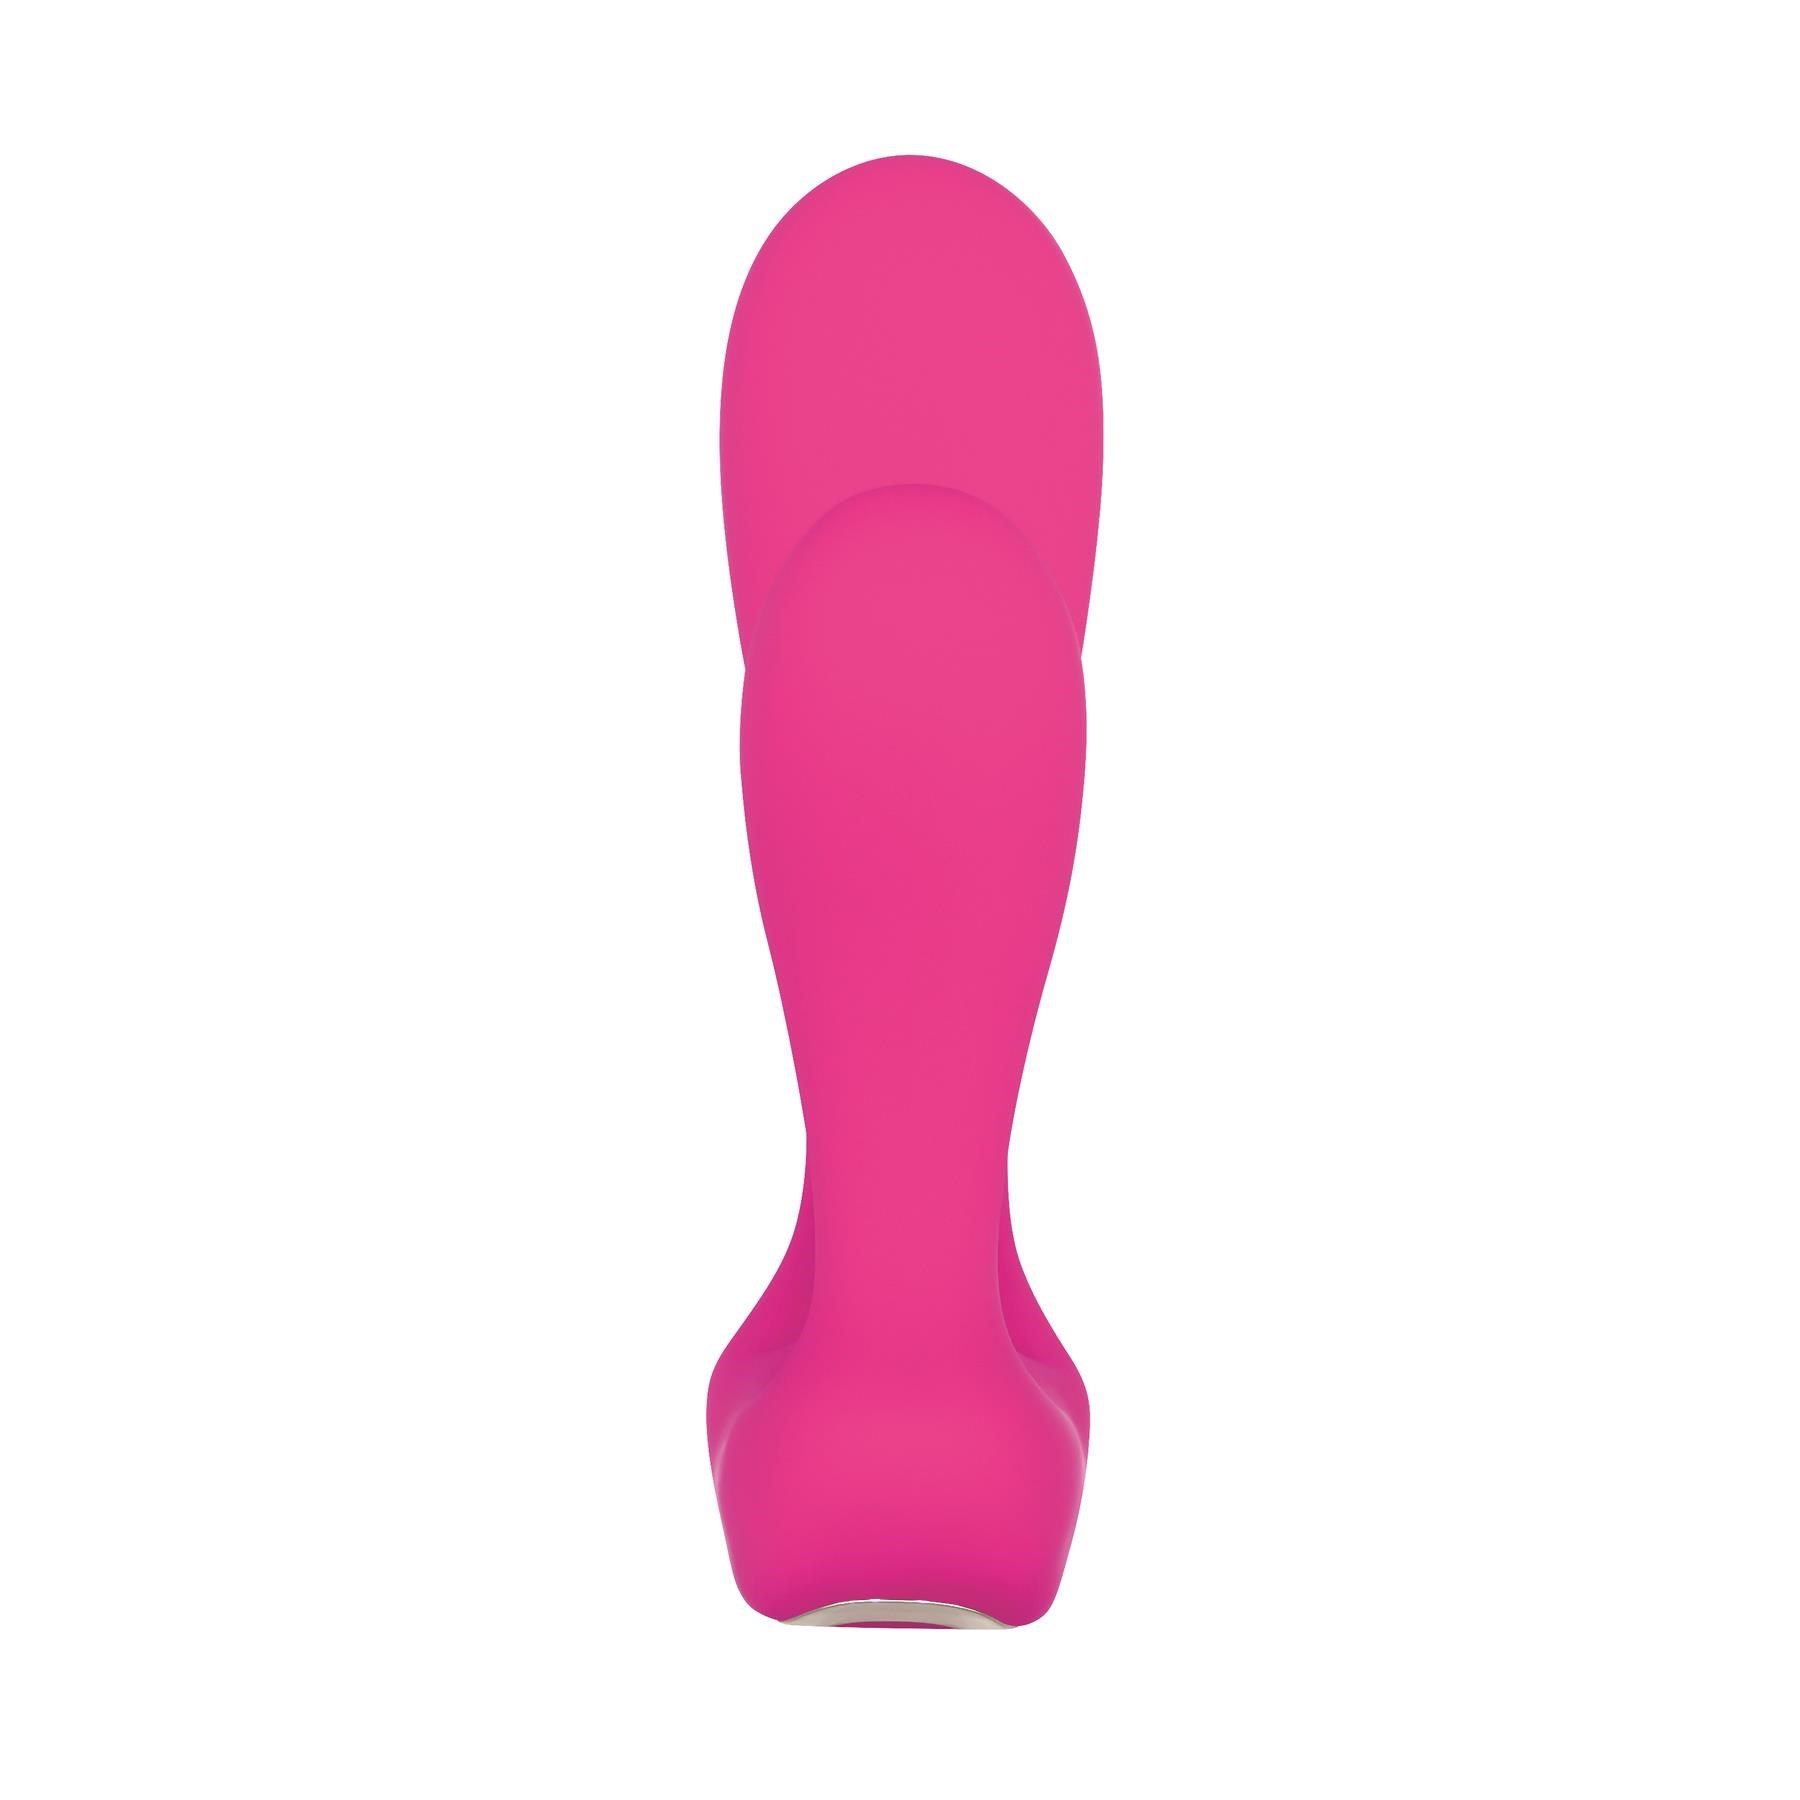 Adam & Eve Dual Entry Vibrator with Remote Control - Front